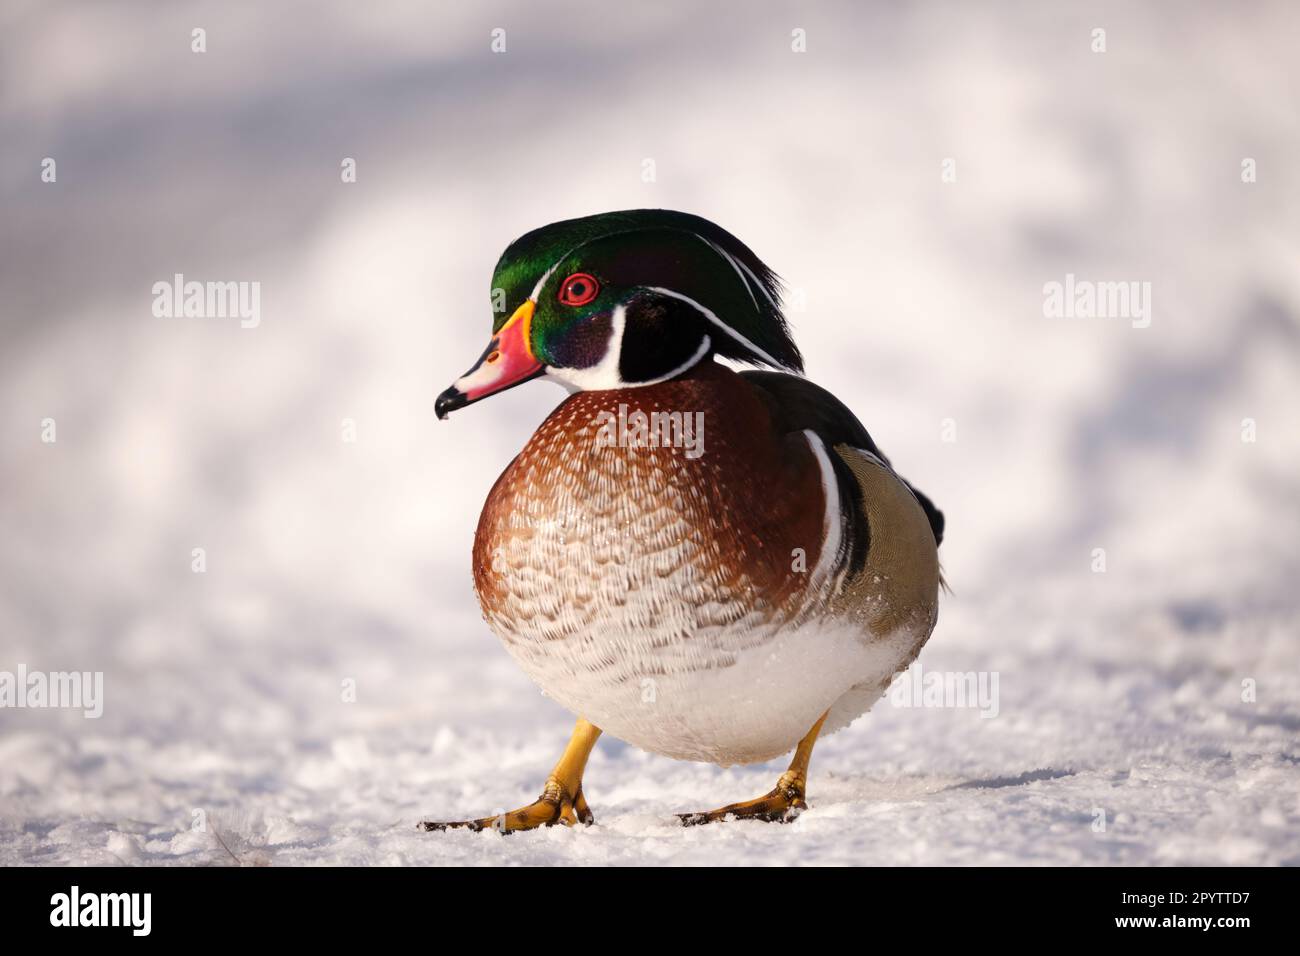 Male wood duck, Aix Sponsa, during winter in snow, walking sideways looking at camera Stock Photo